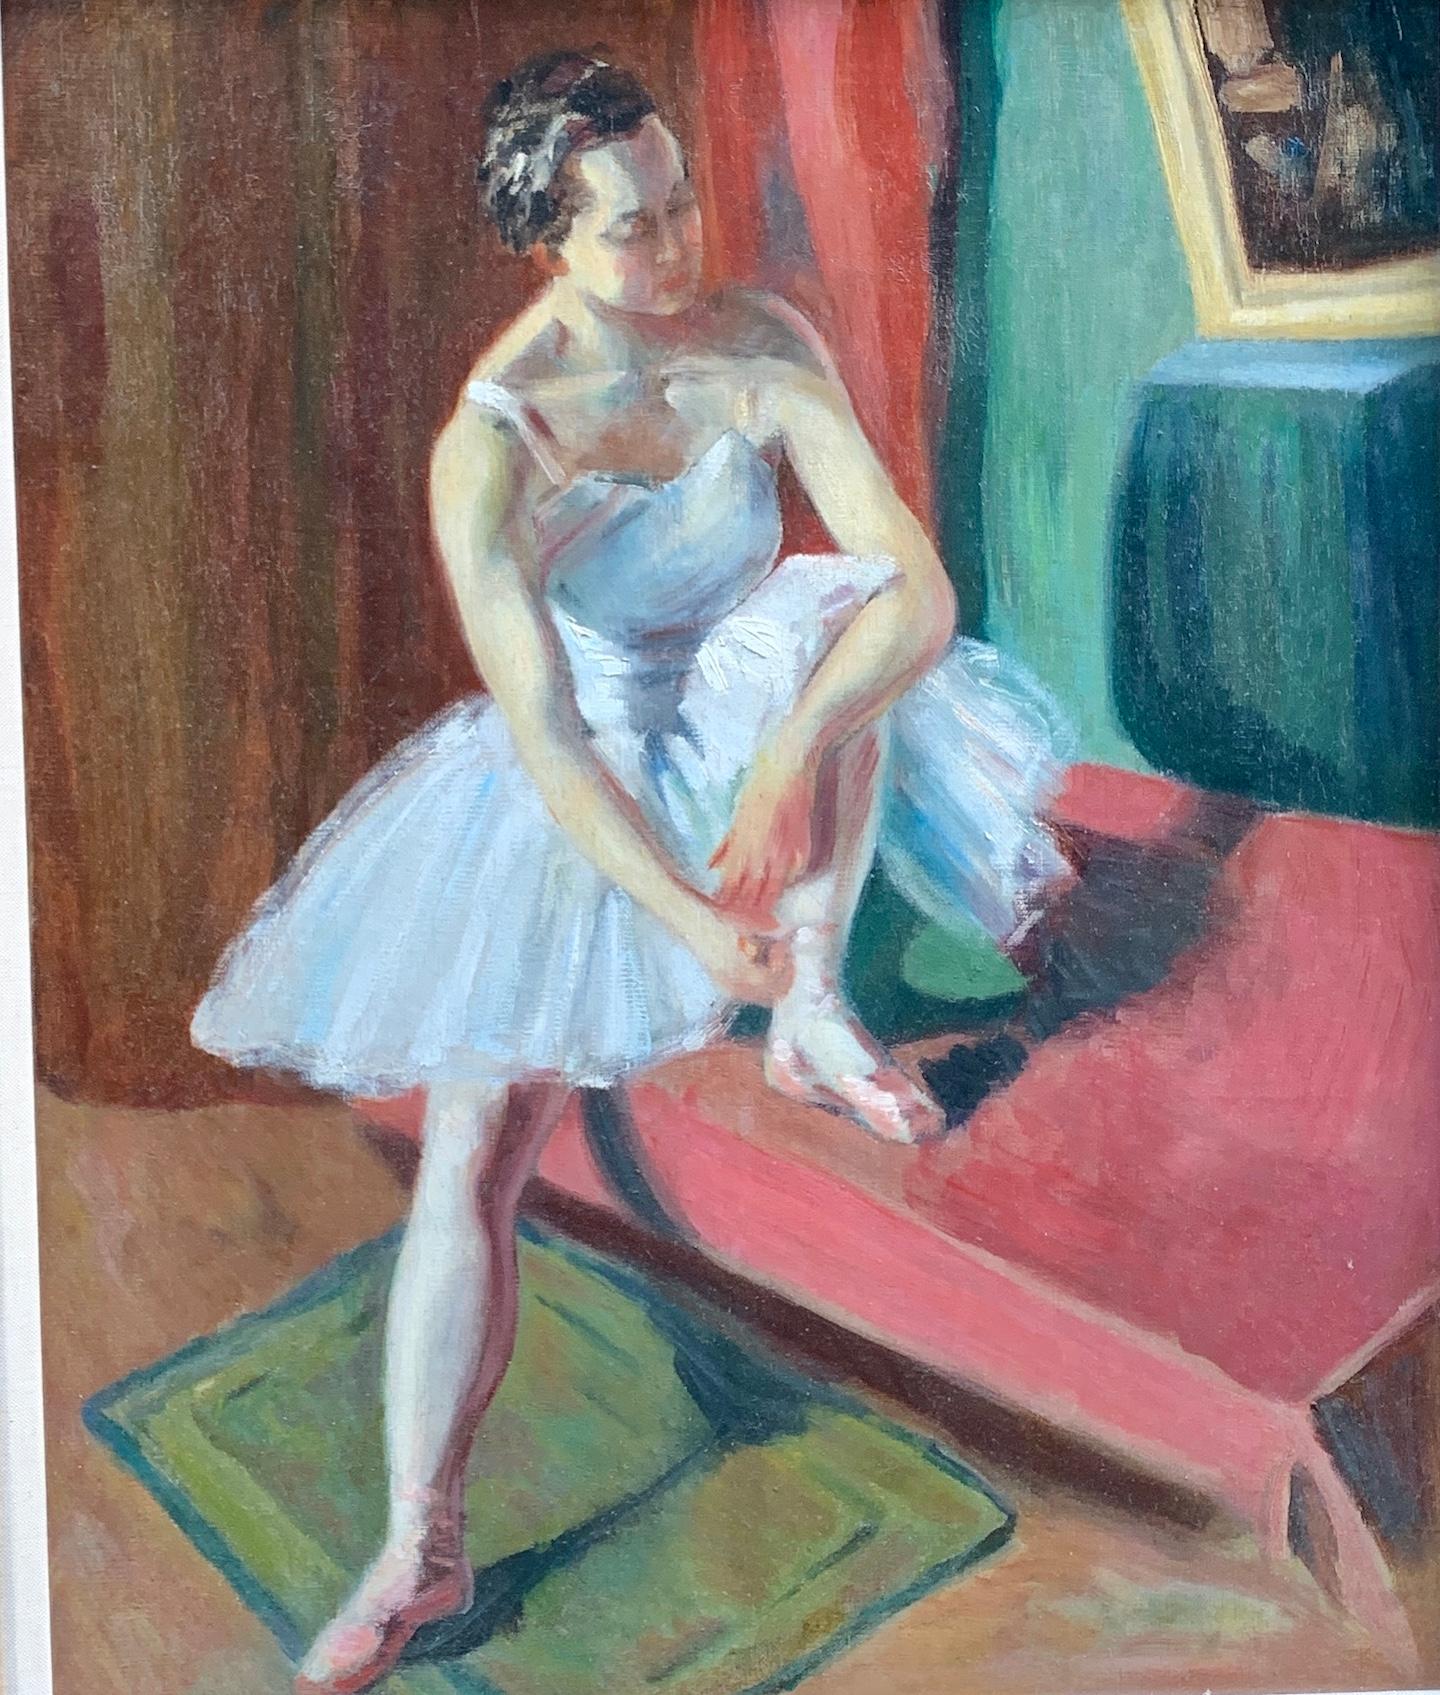 Early 20th century French oil, seated ballerina adjusting her ballet slipper. - Painting by Impressionist French School